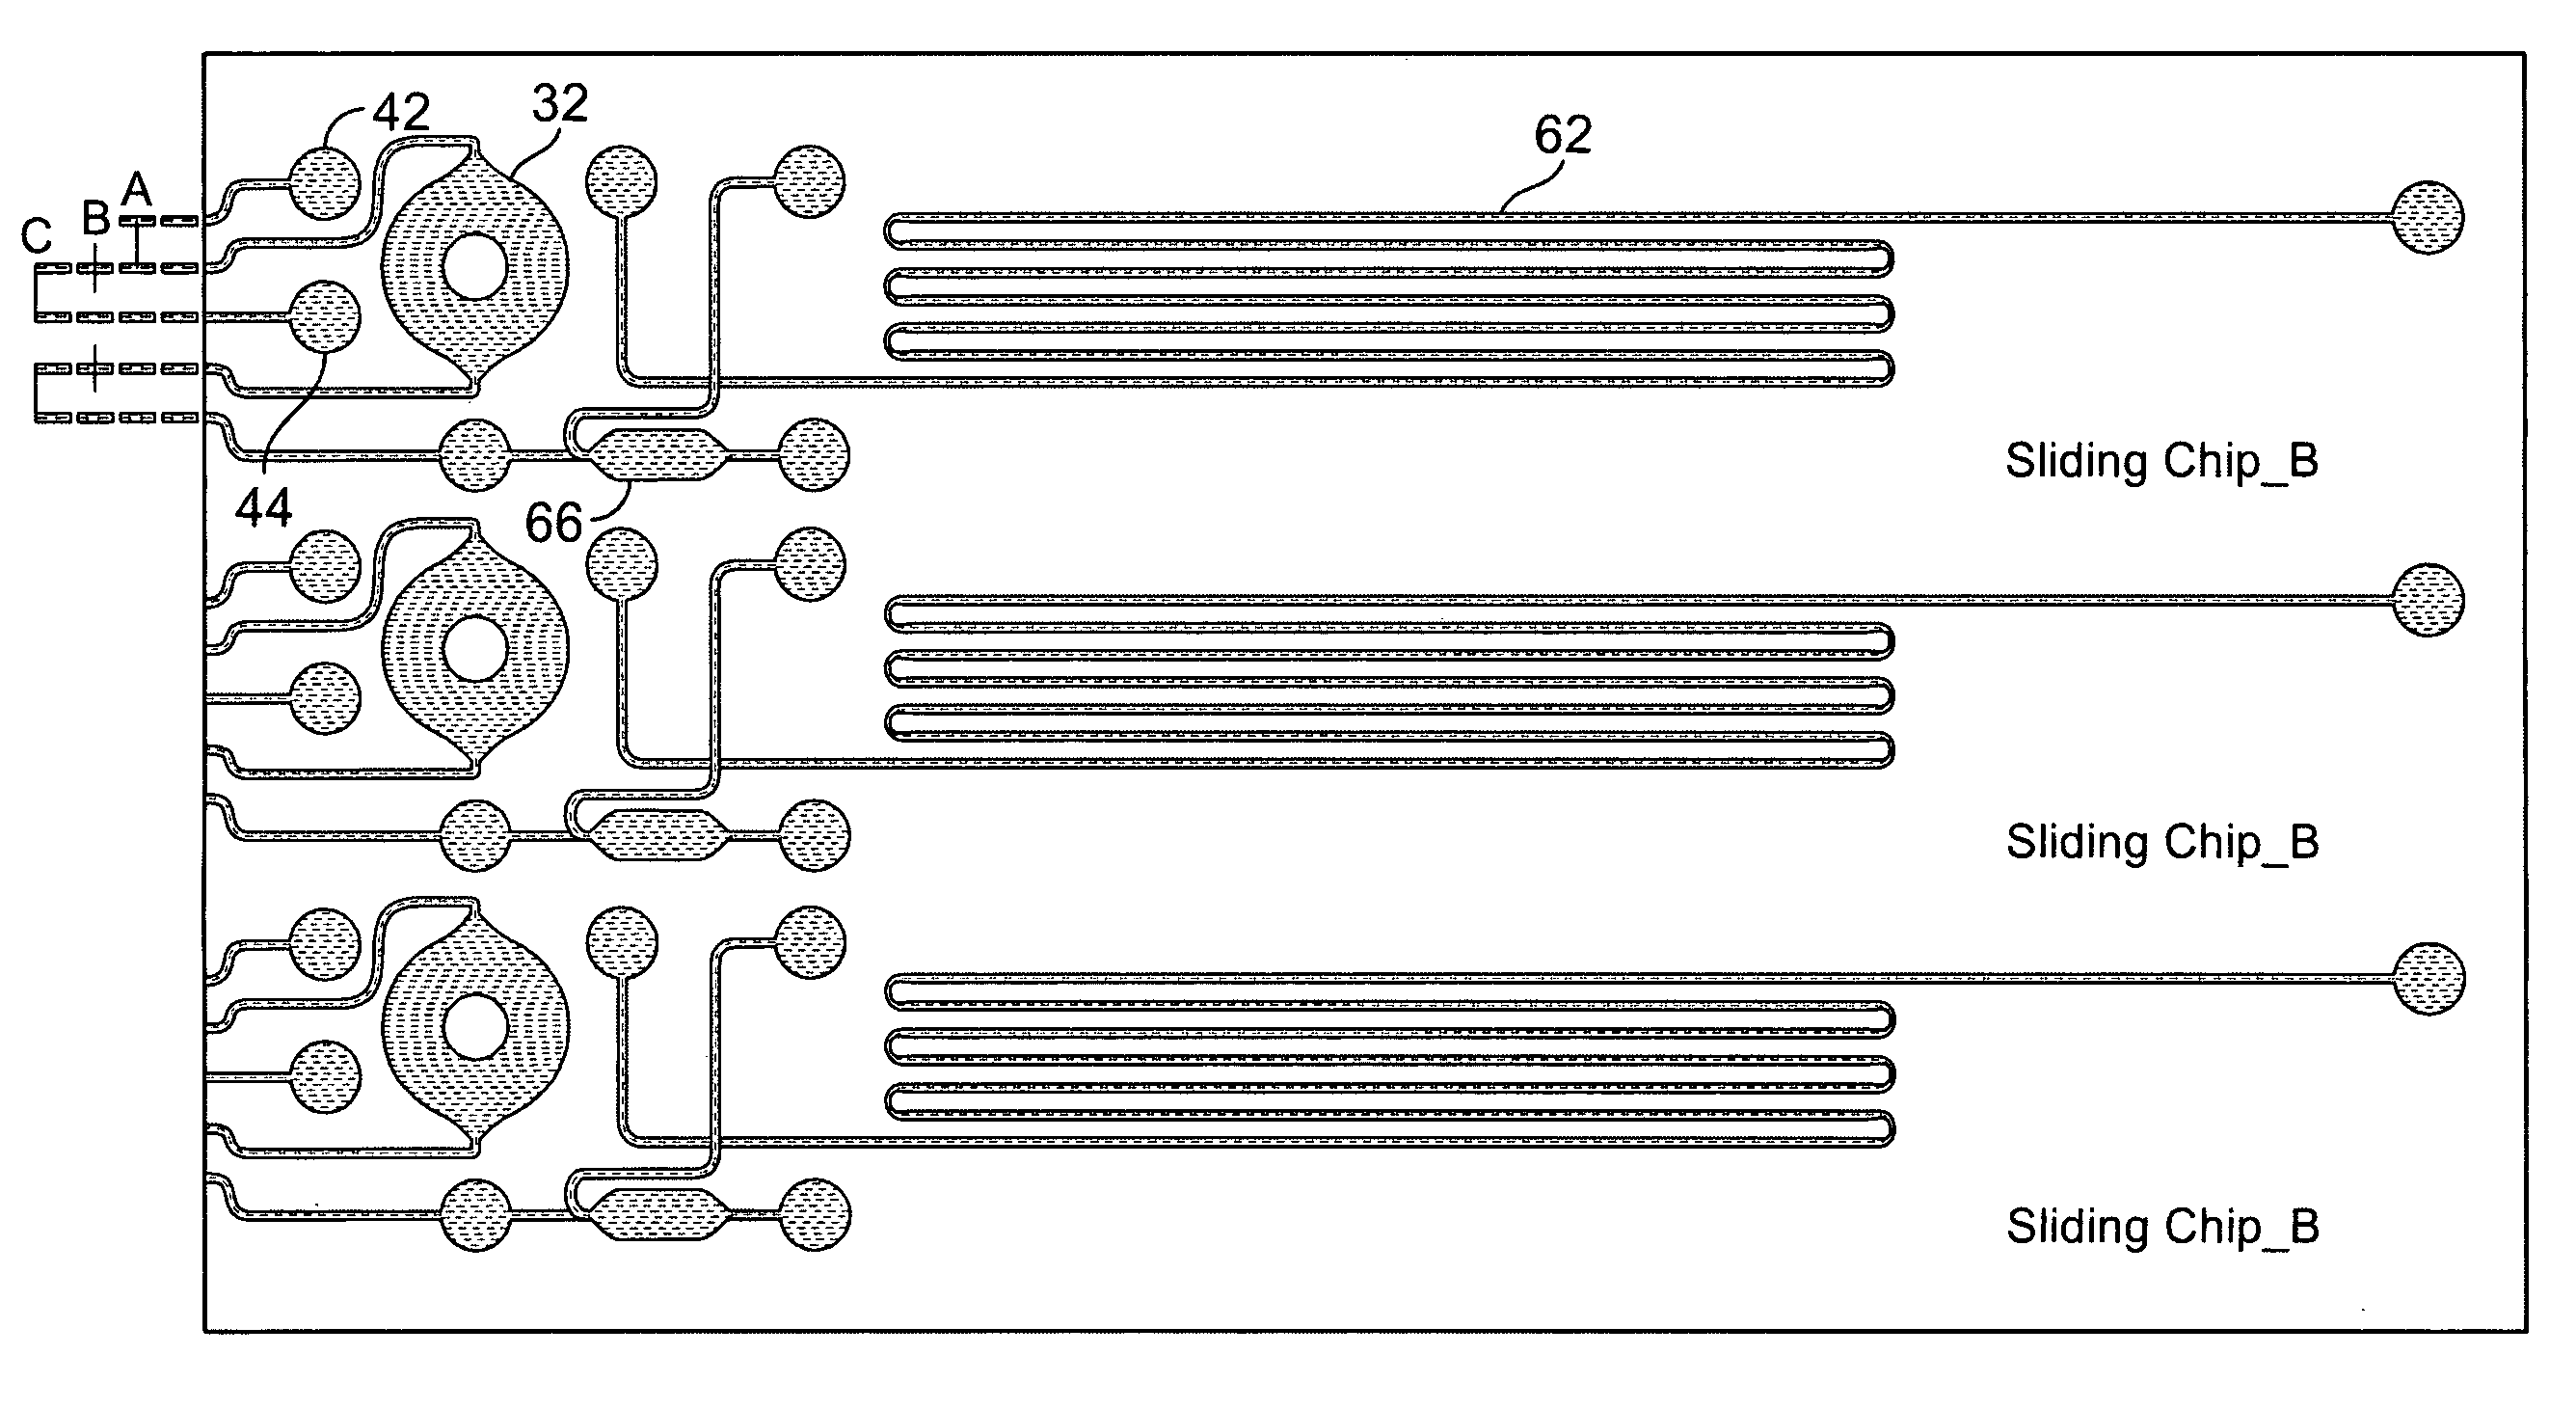 Integrated system with modular microfluidic components